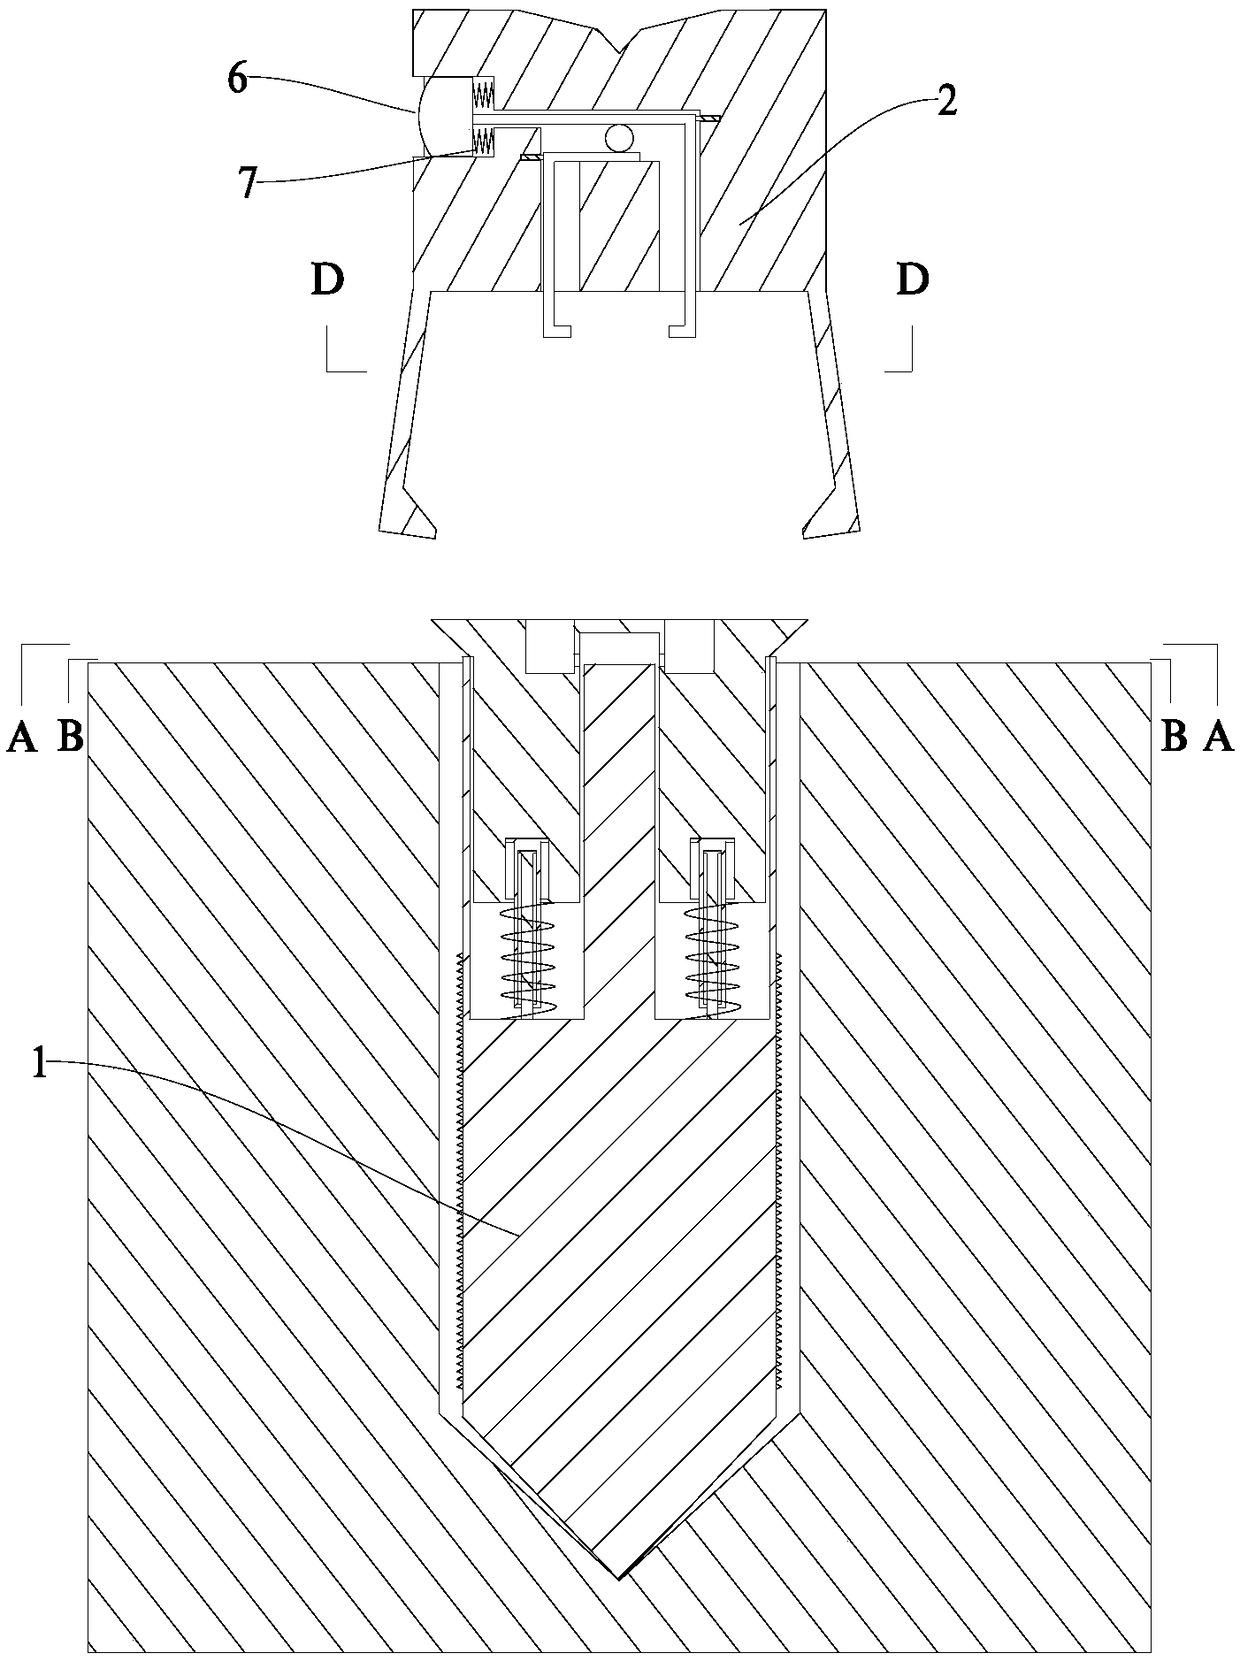 Anti-derotation screw capable of cooperating with hole depth